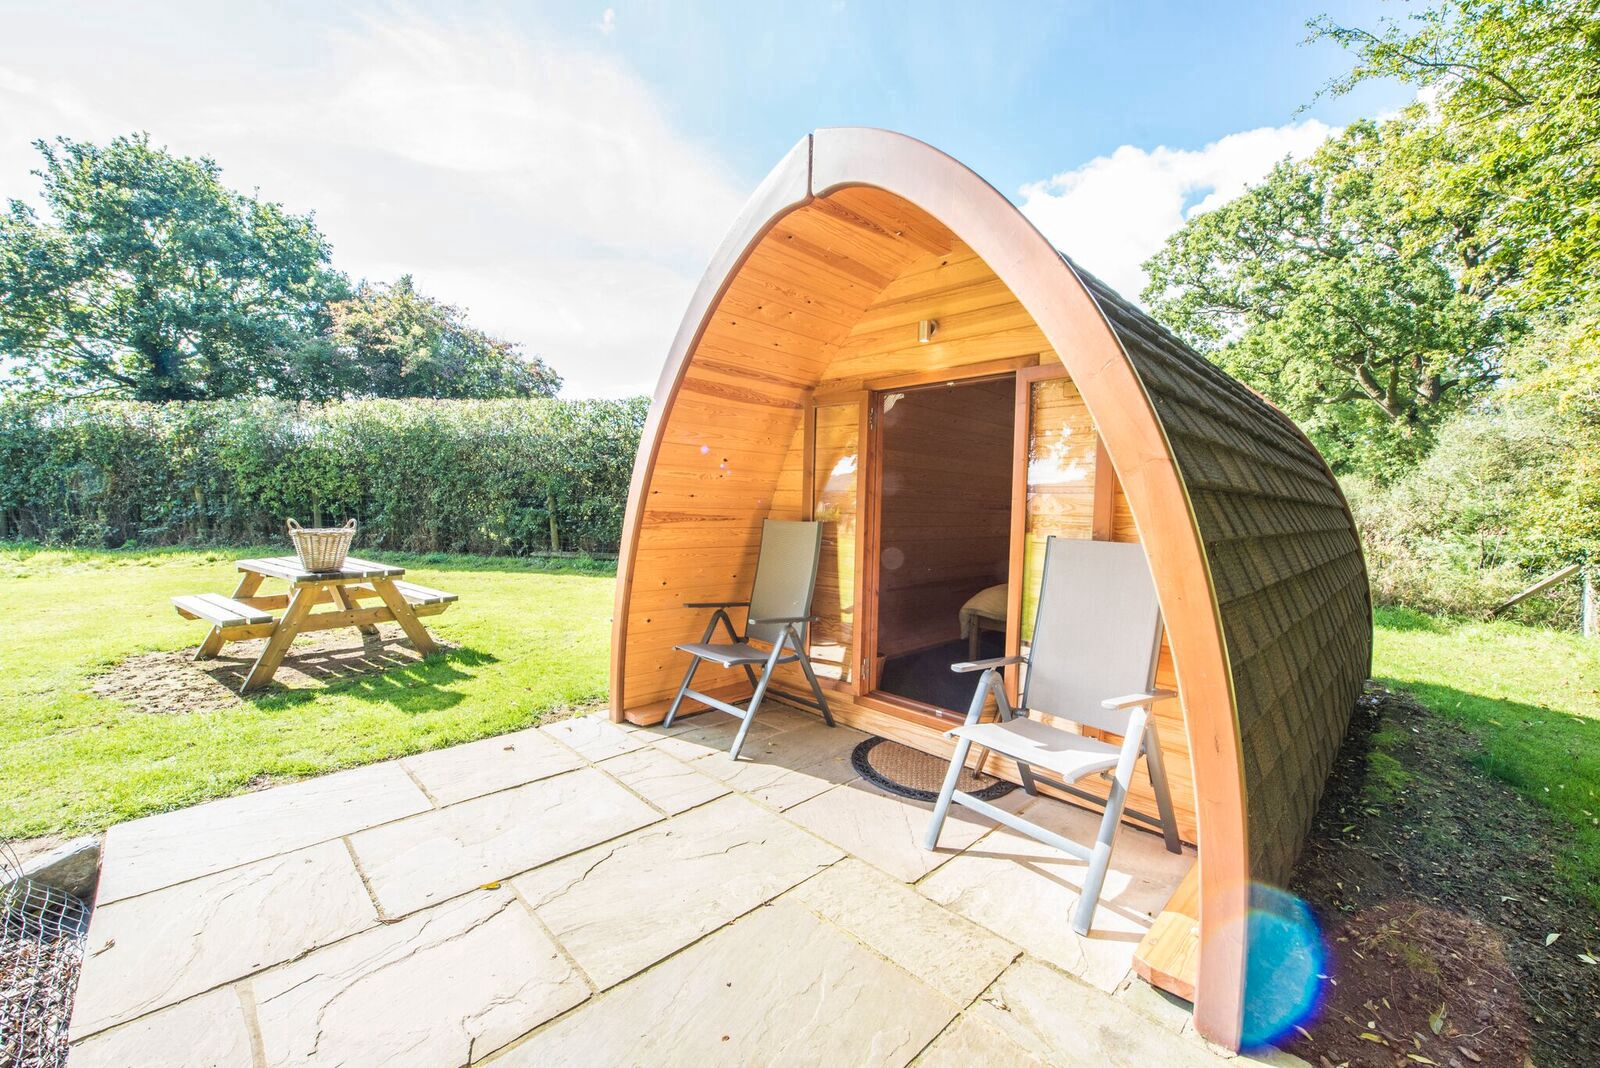 Glamping in Shropshire – The best glamping locations in Shropshire